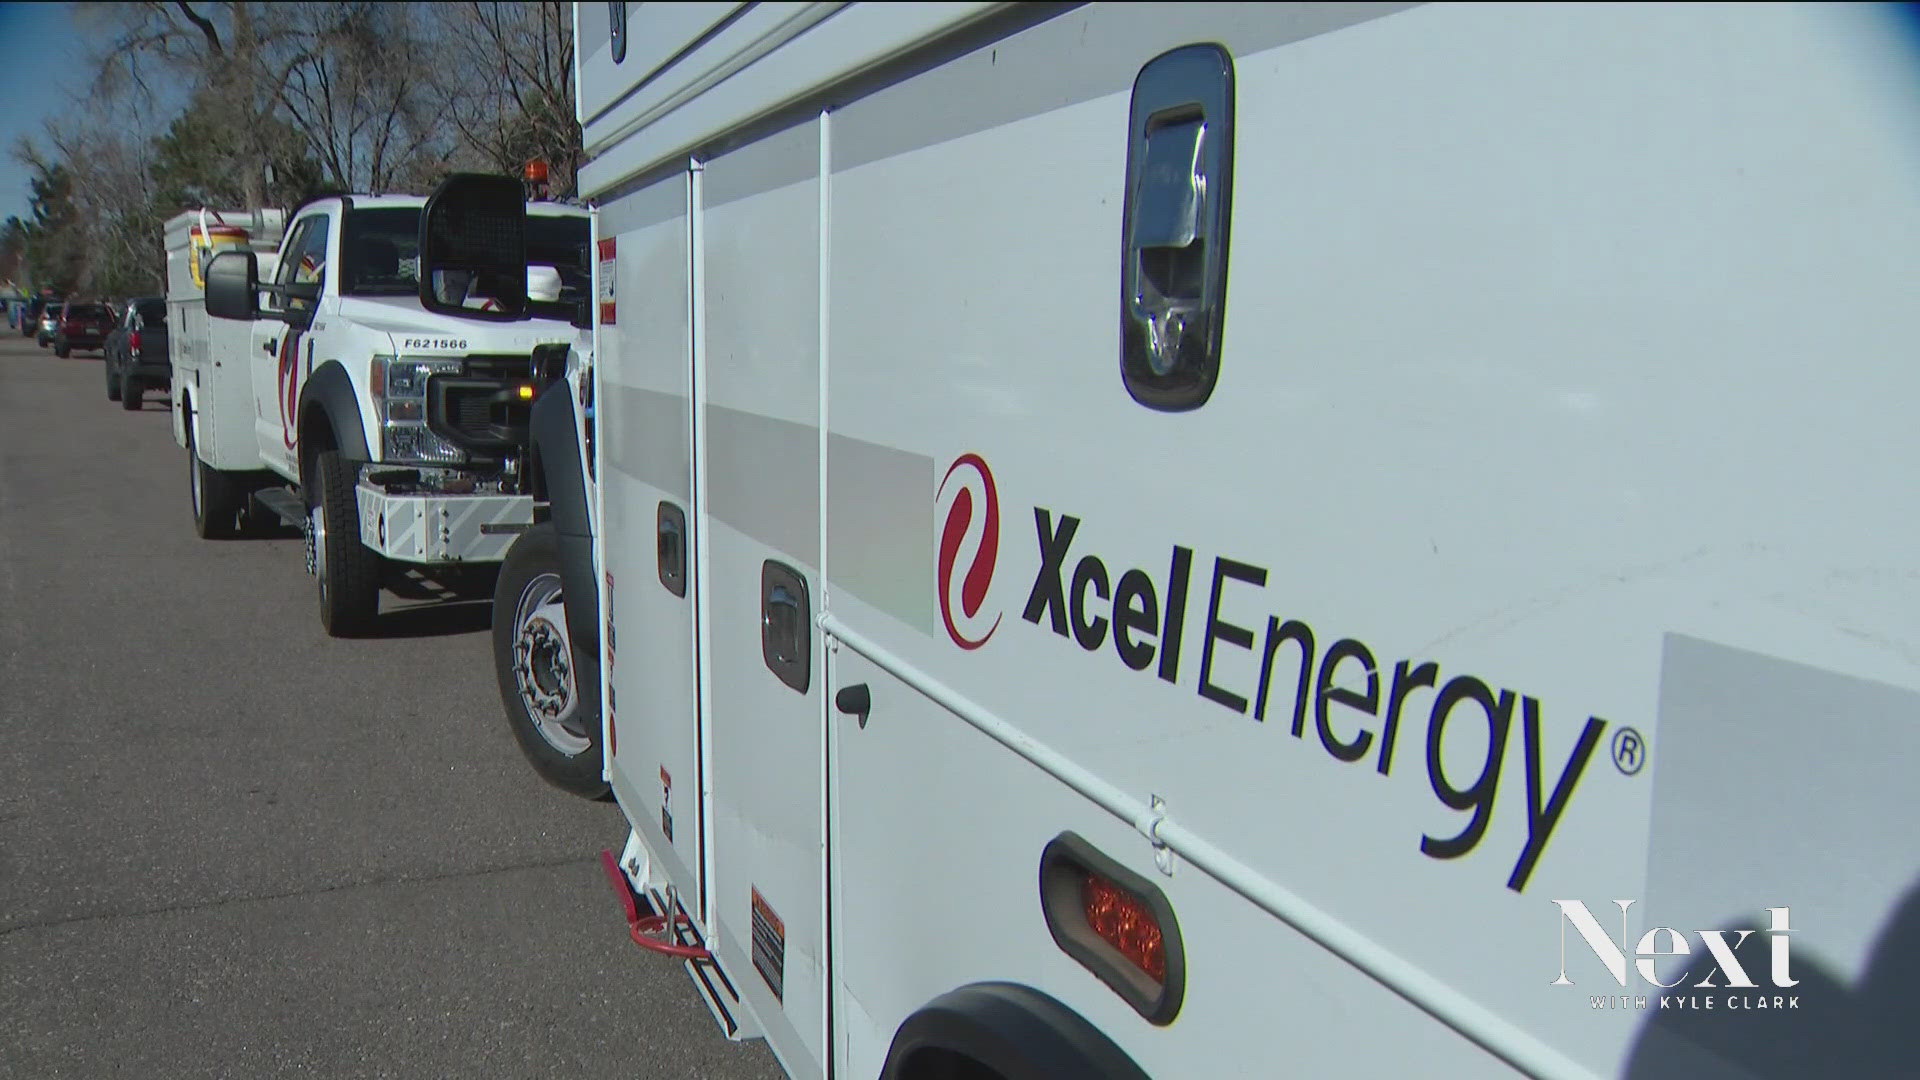 The governor received notice of the power shutoff, while Xcel provided a map to customers hours after the power went out.